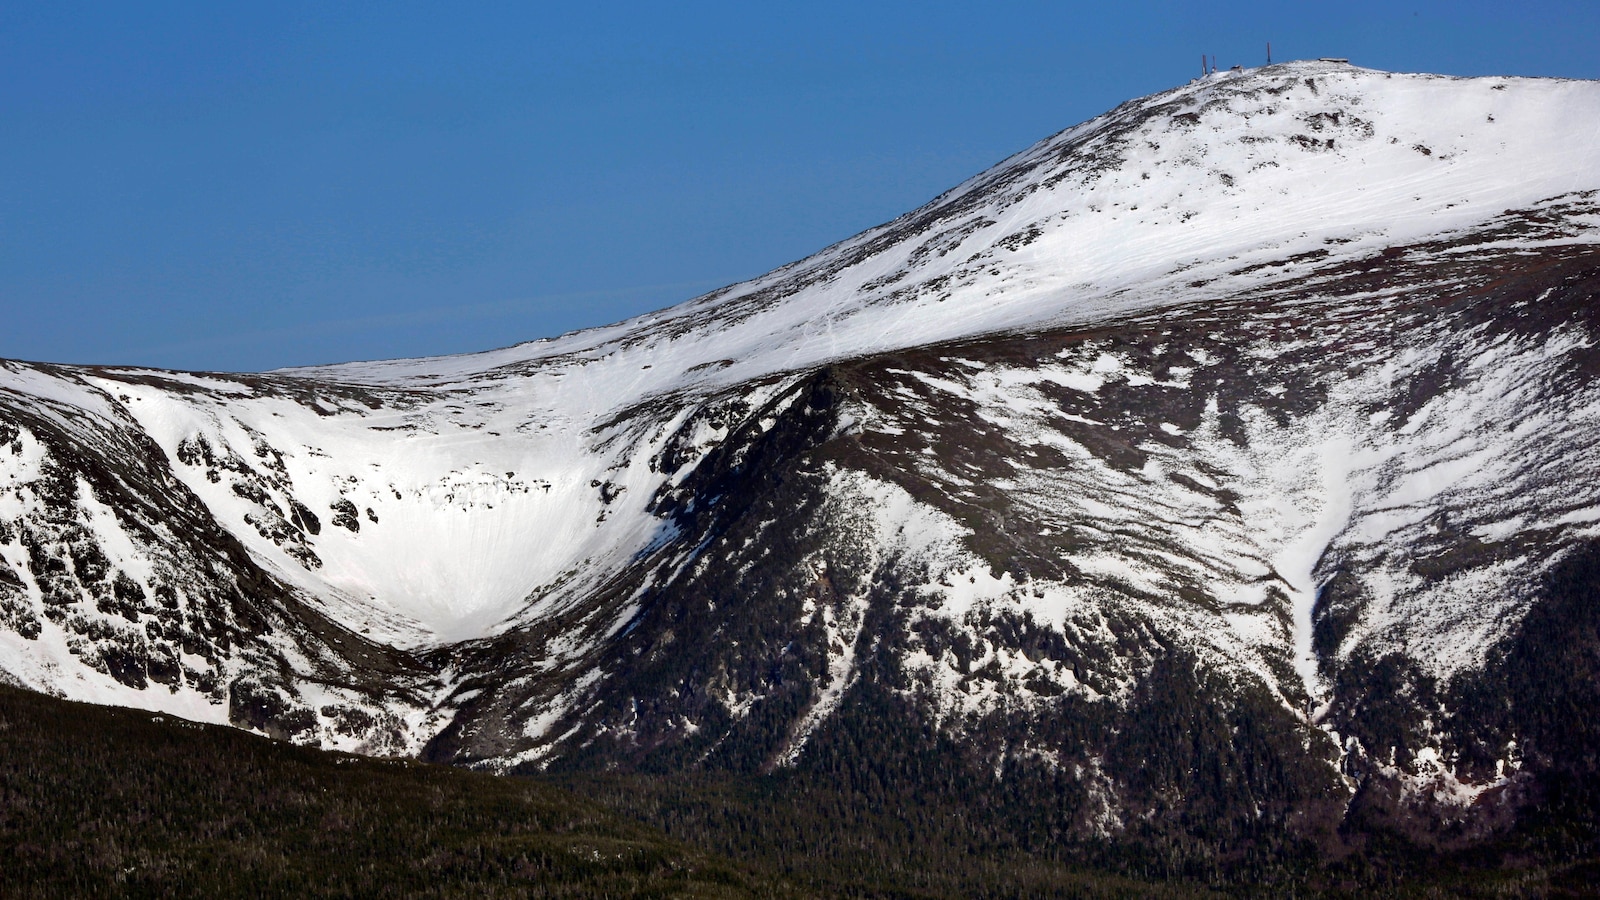 A backcountry skier has died on New Hampshire's Mount Washington in icy circumstances; 2 others injured